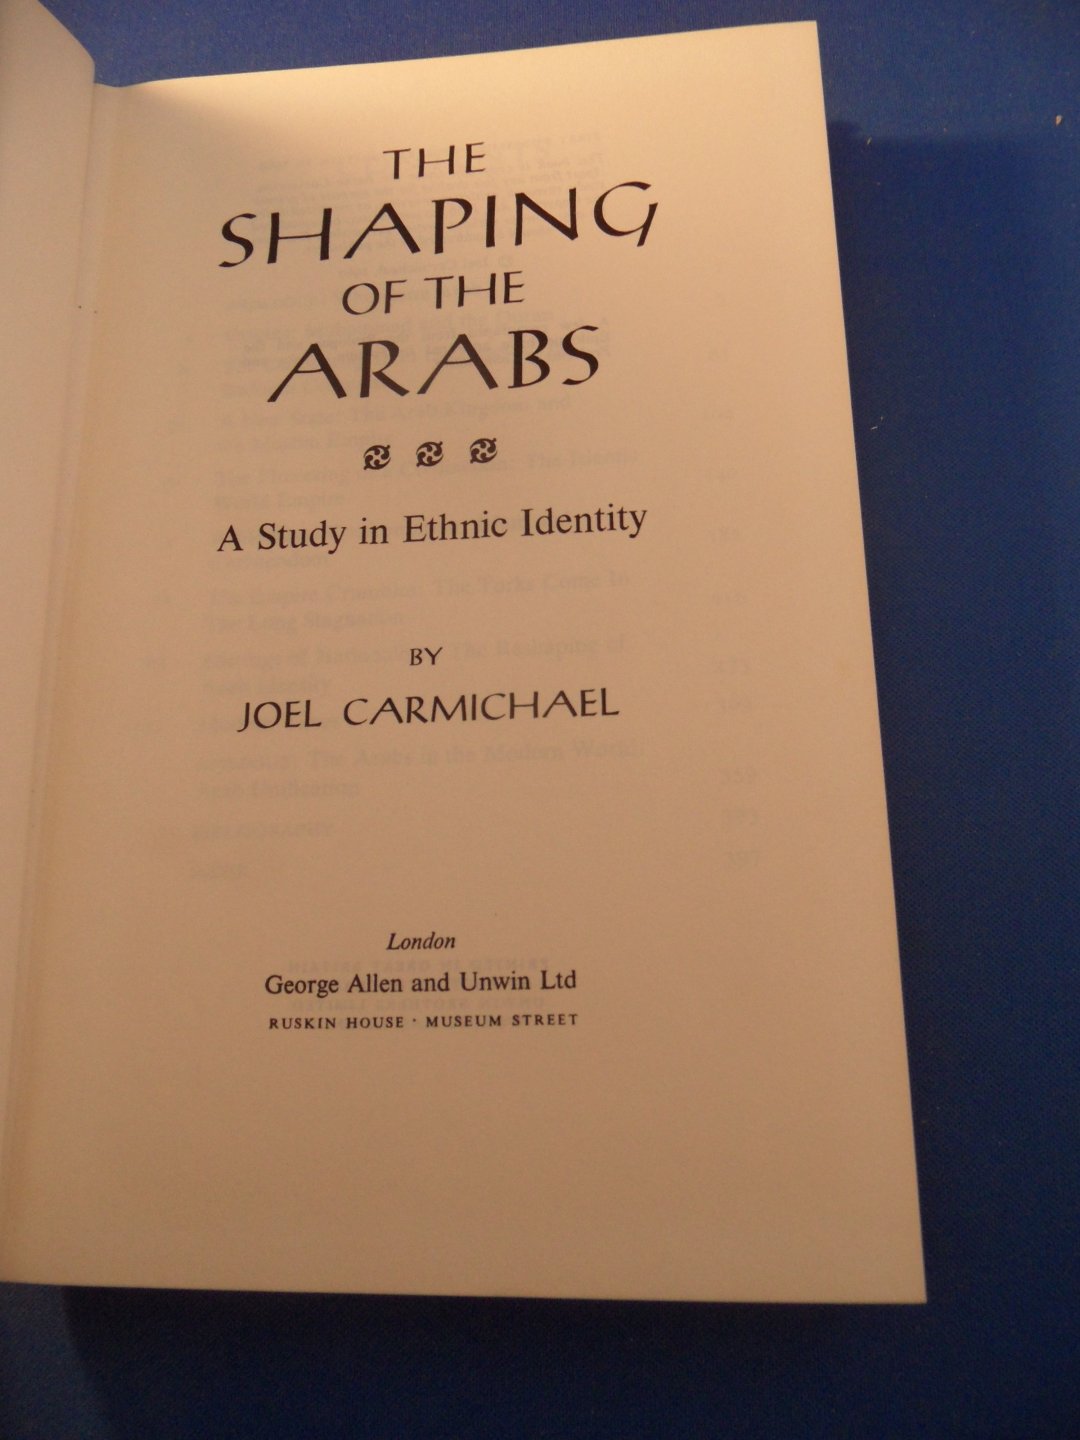 Carmichael, Joe - The shaping of the arabs. A study in ethnic identity